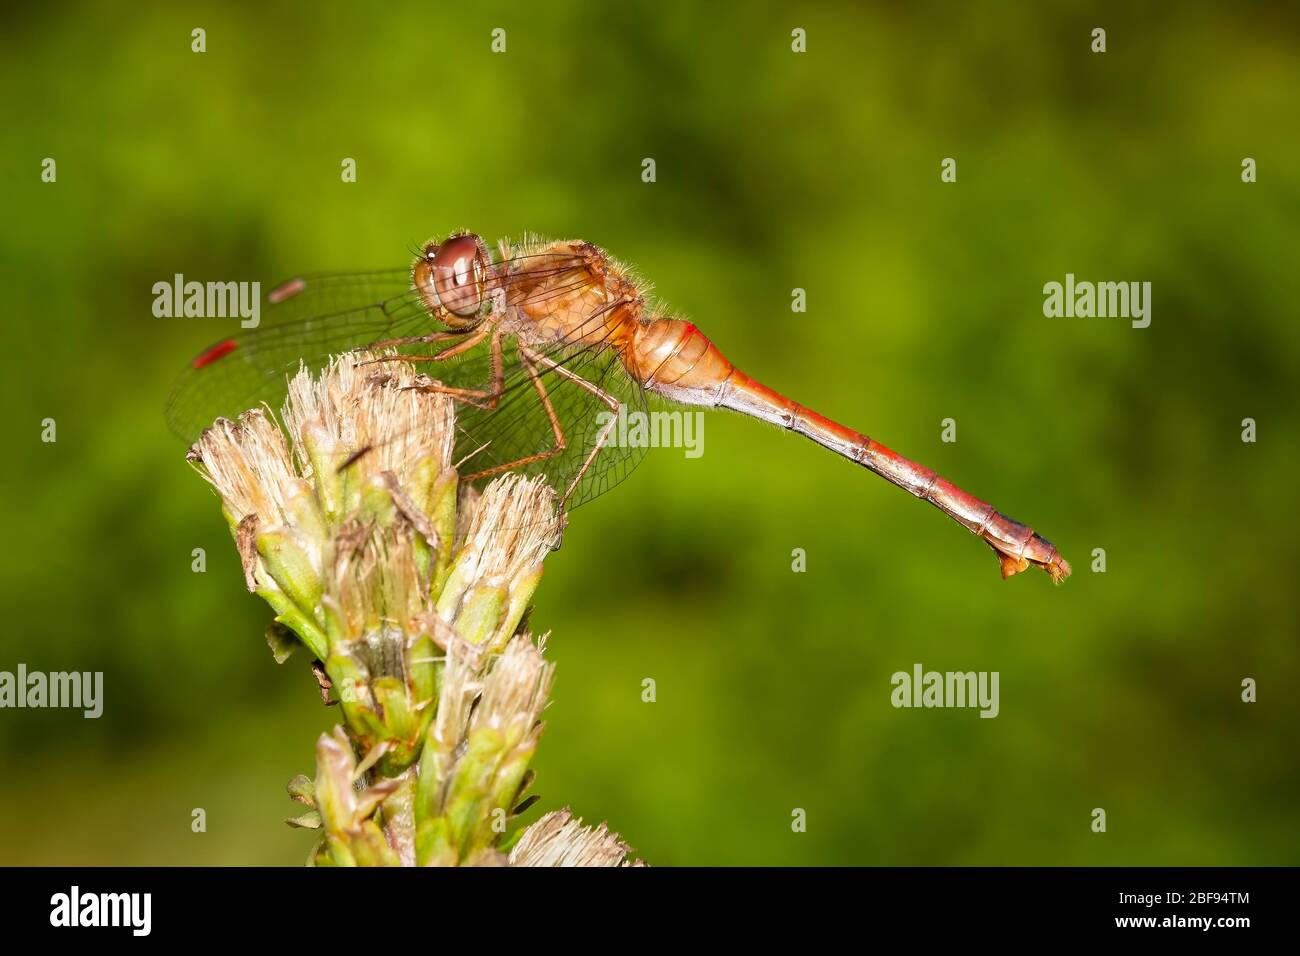 Dragonfly perched on a liatris with green blurred background Stock Photo